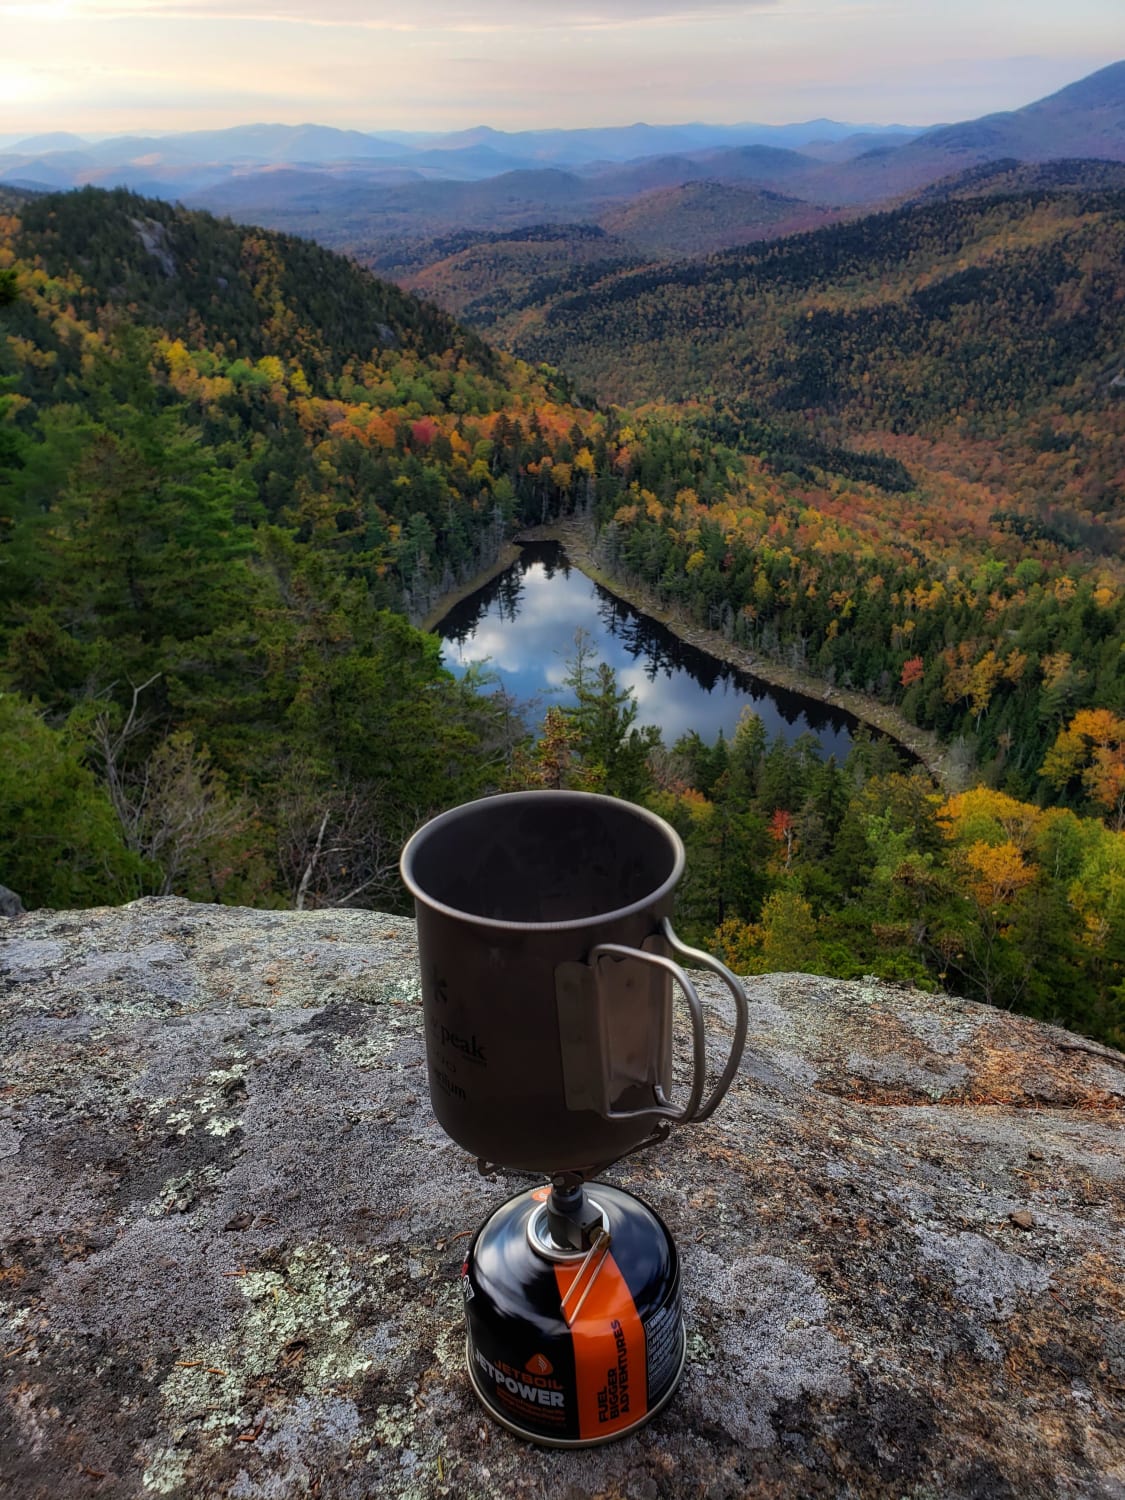 Brew with a view. Coffee break while hiking in the Adirondack Mountains, NY. UL mess kit details in comments.